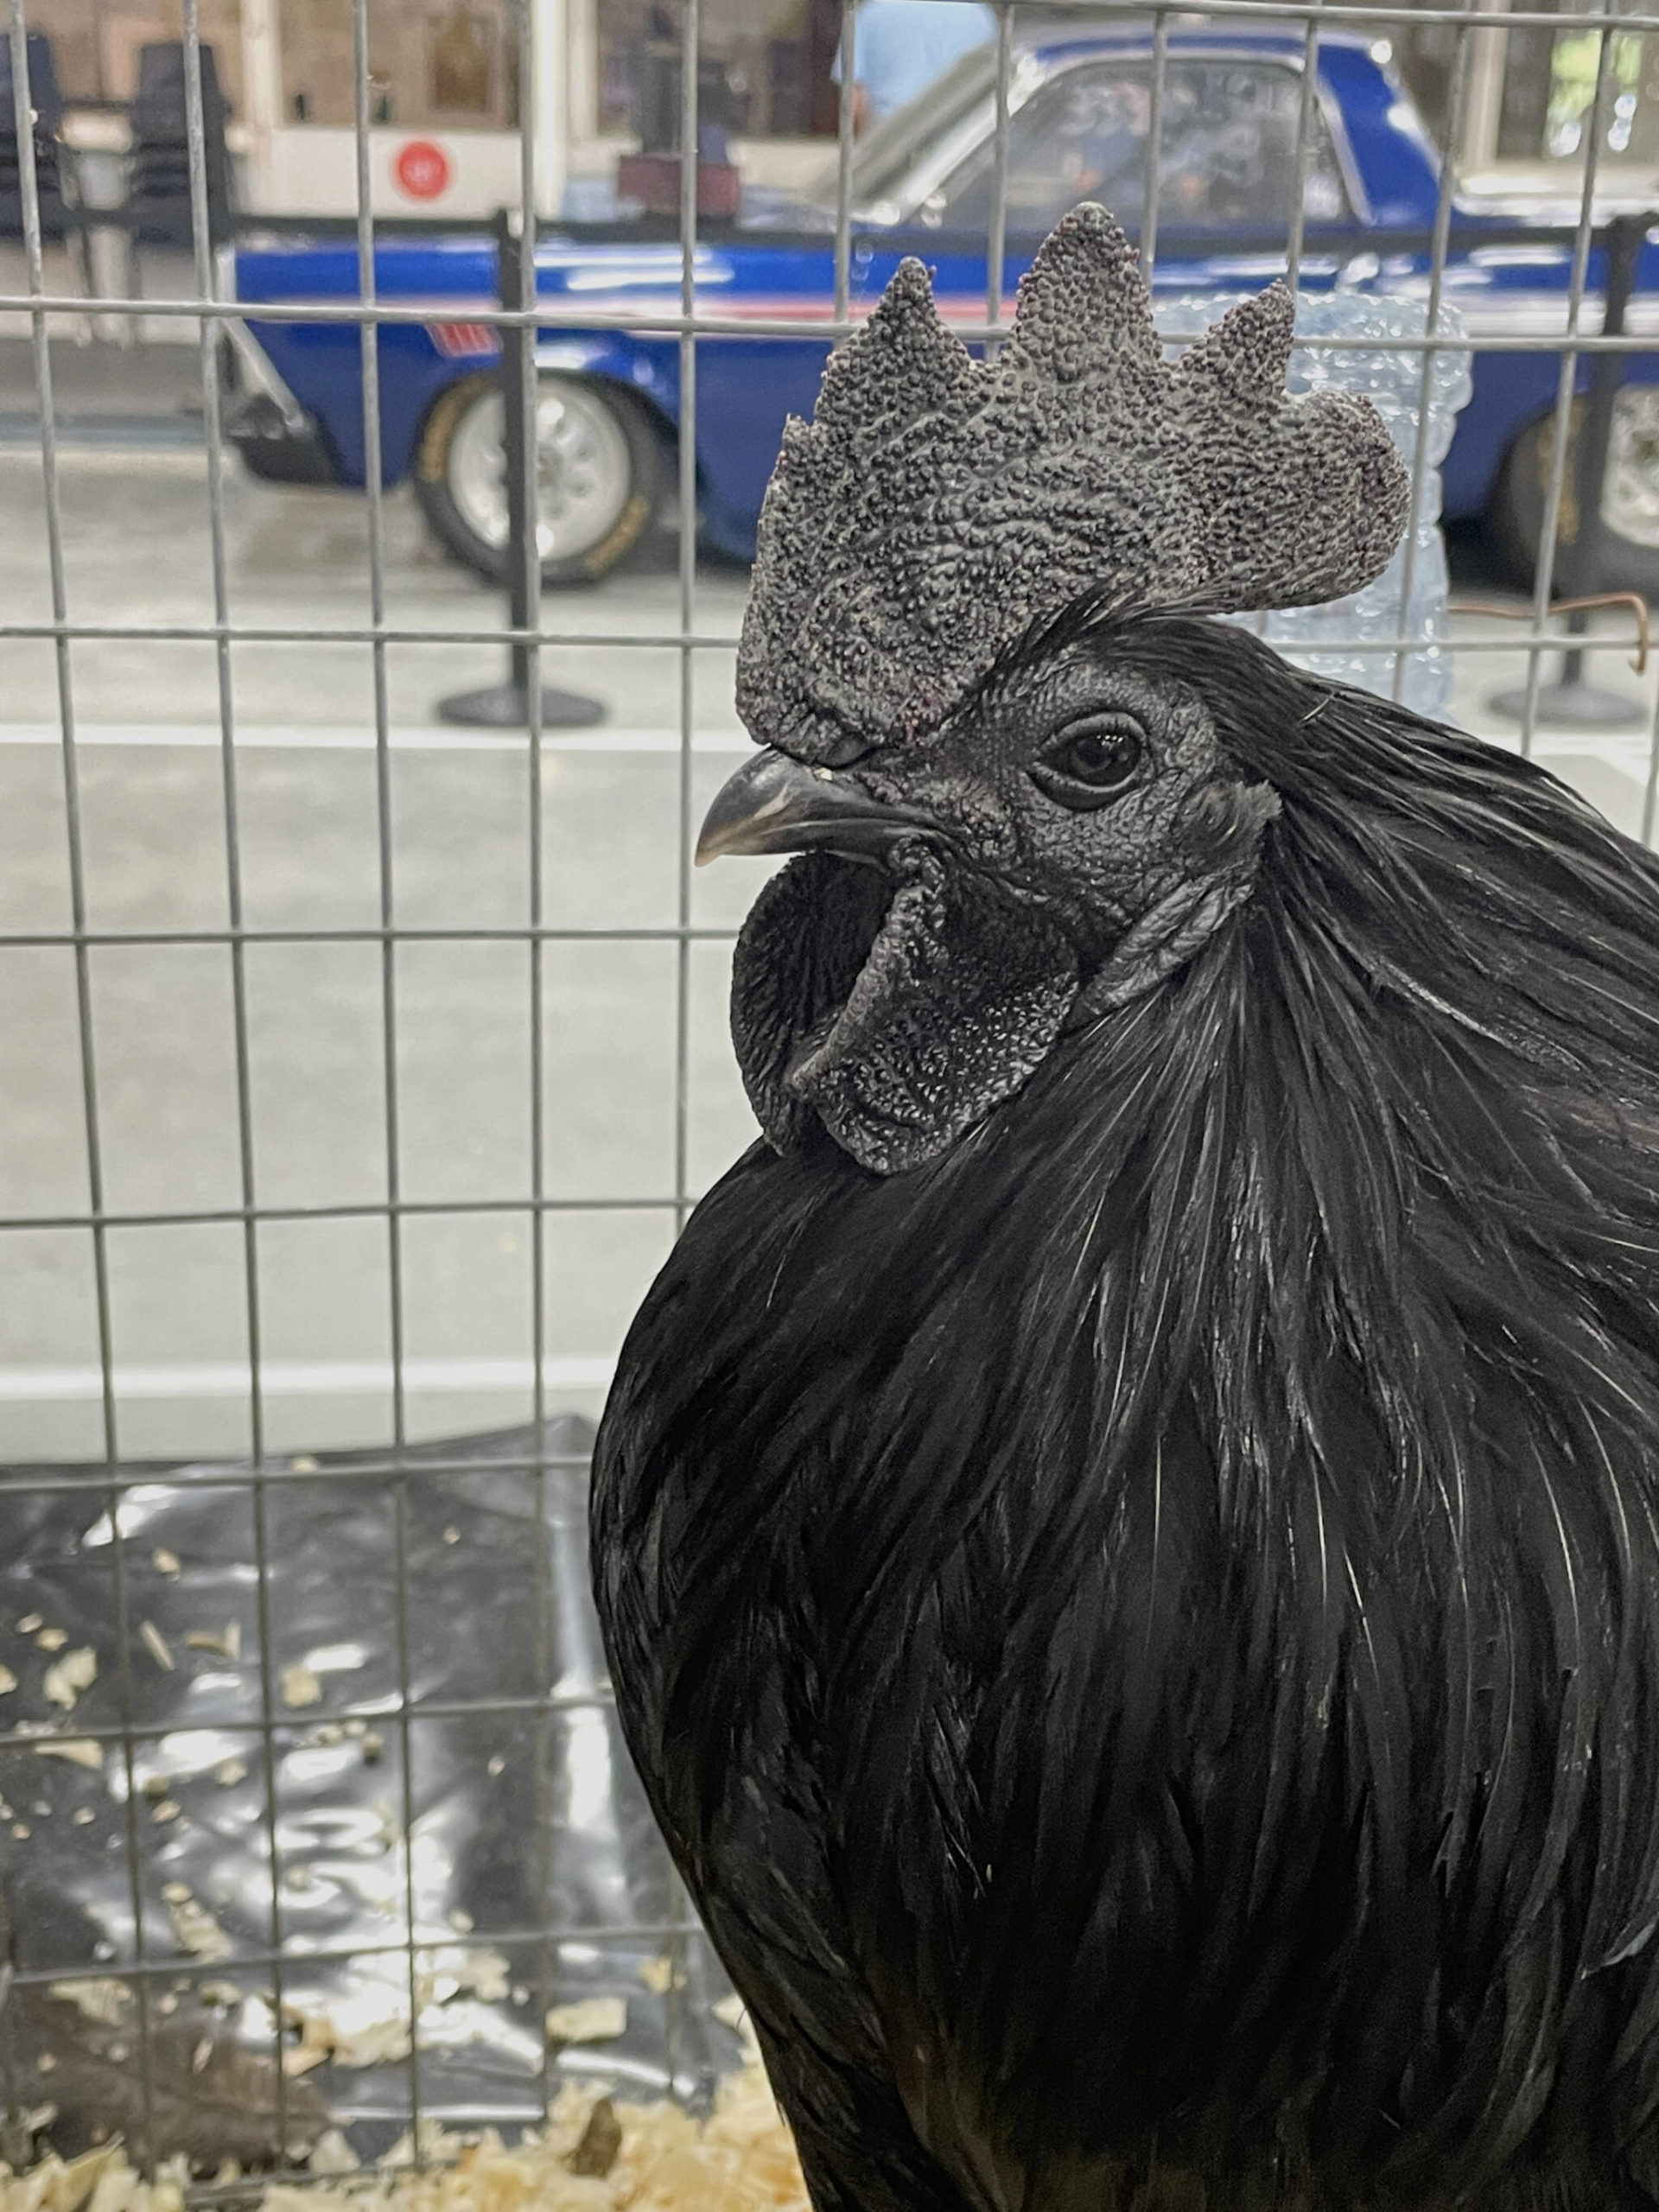 Farmers showed off the best of their livestock at the fair. (Photo by Kelsey Yates)